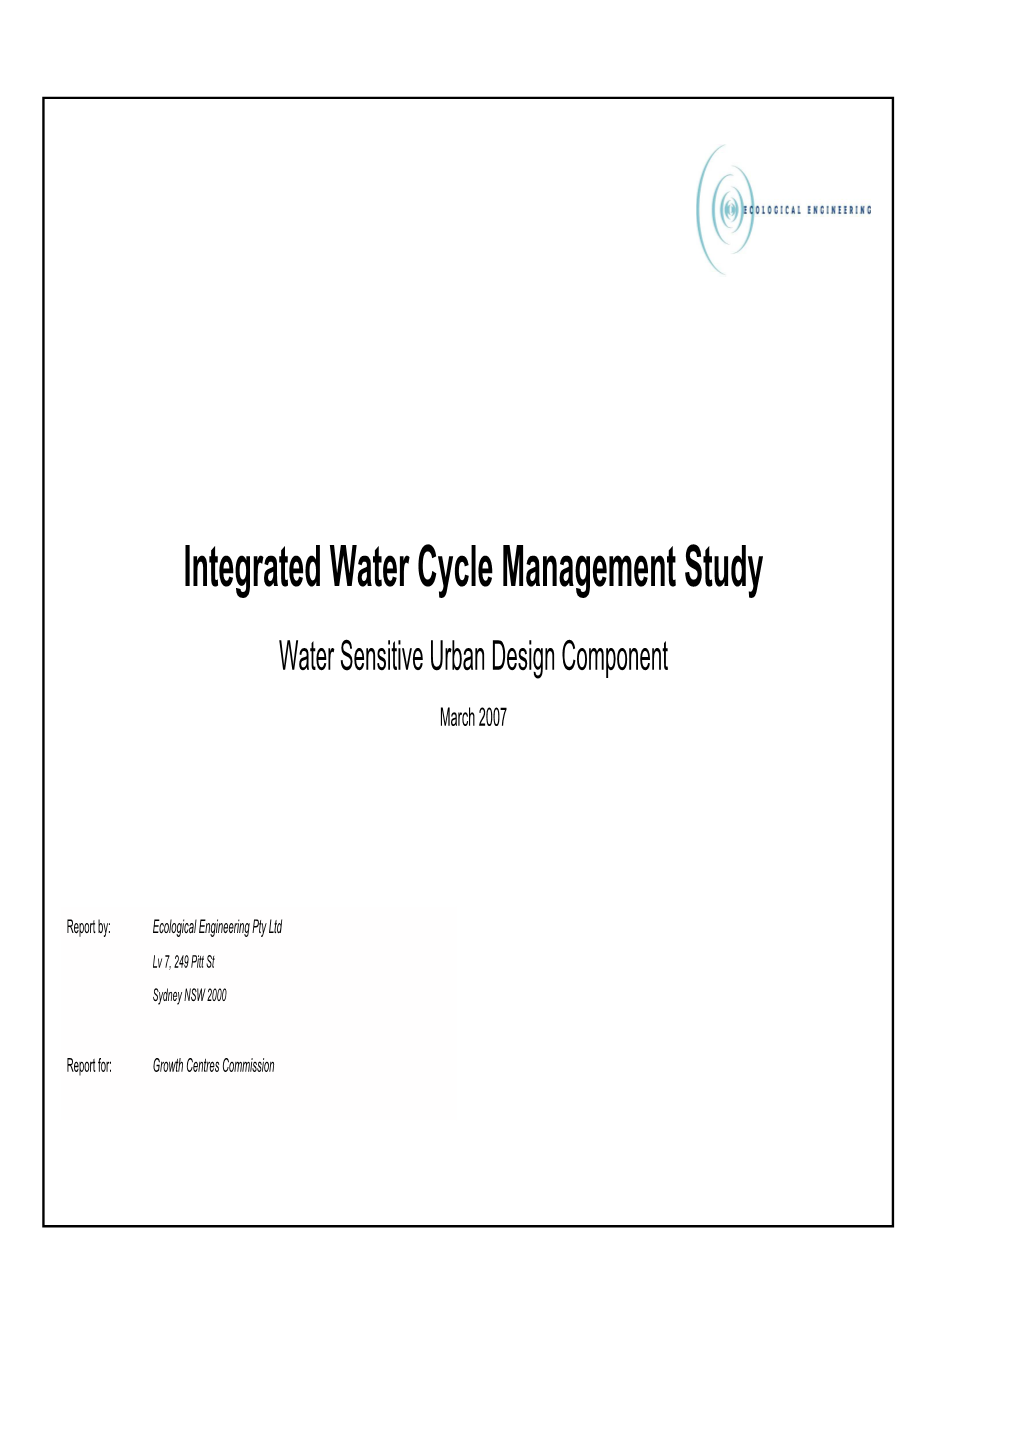 Integrated Water Cycle Management Study Water Sensitive Urban Design Component